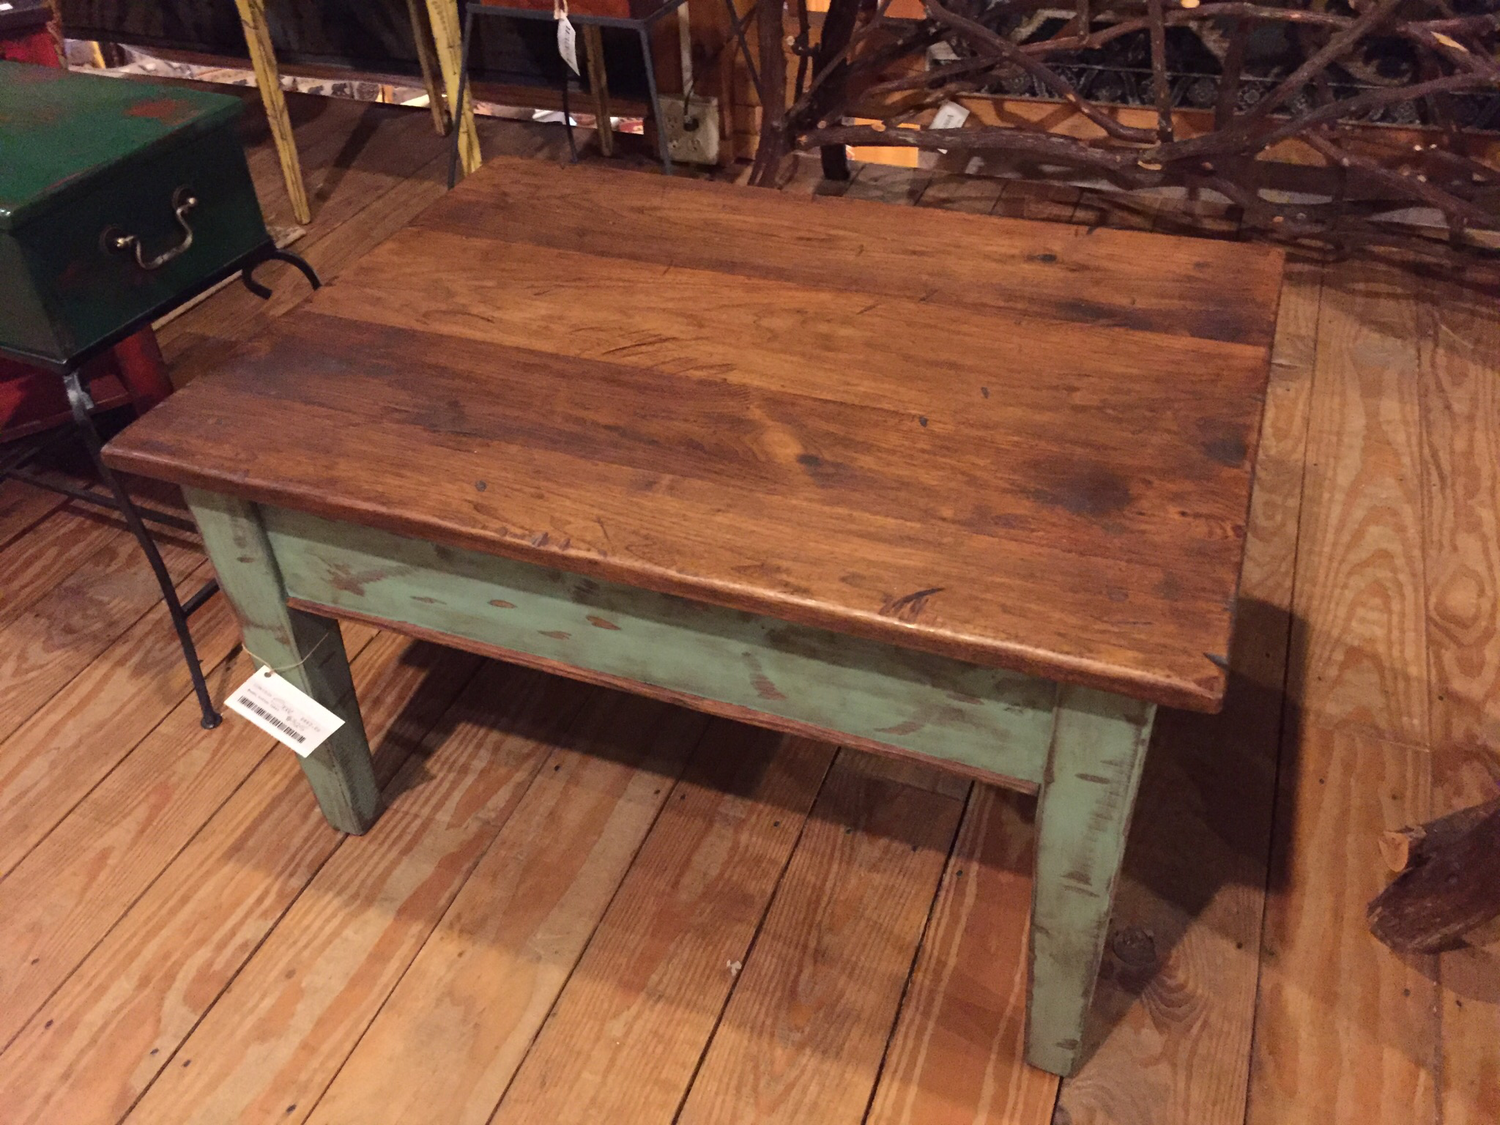 Boone Coffee Table